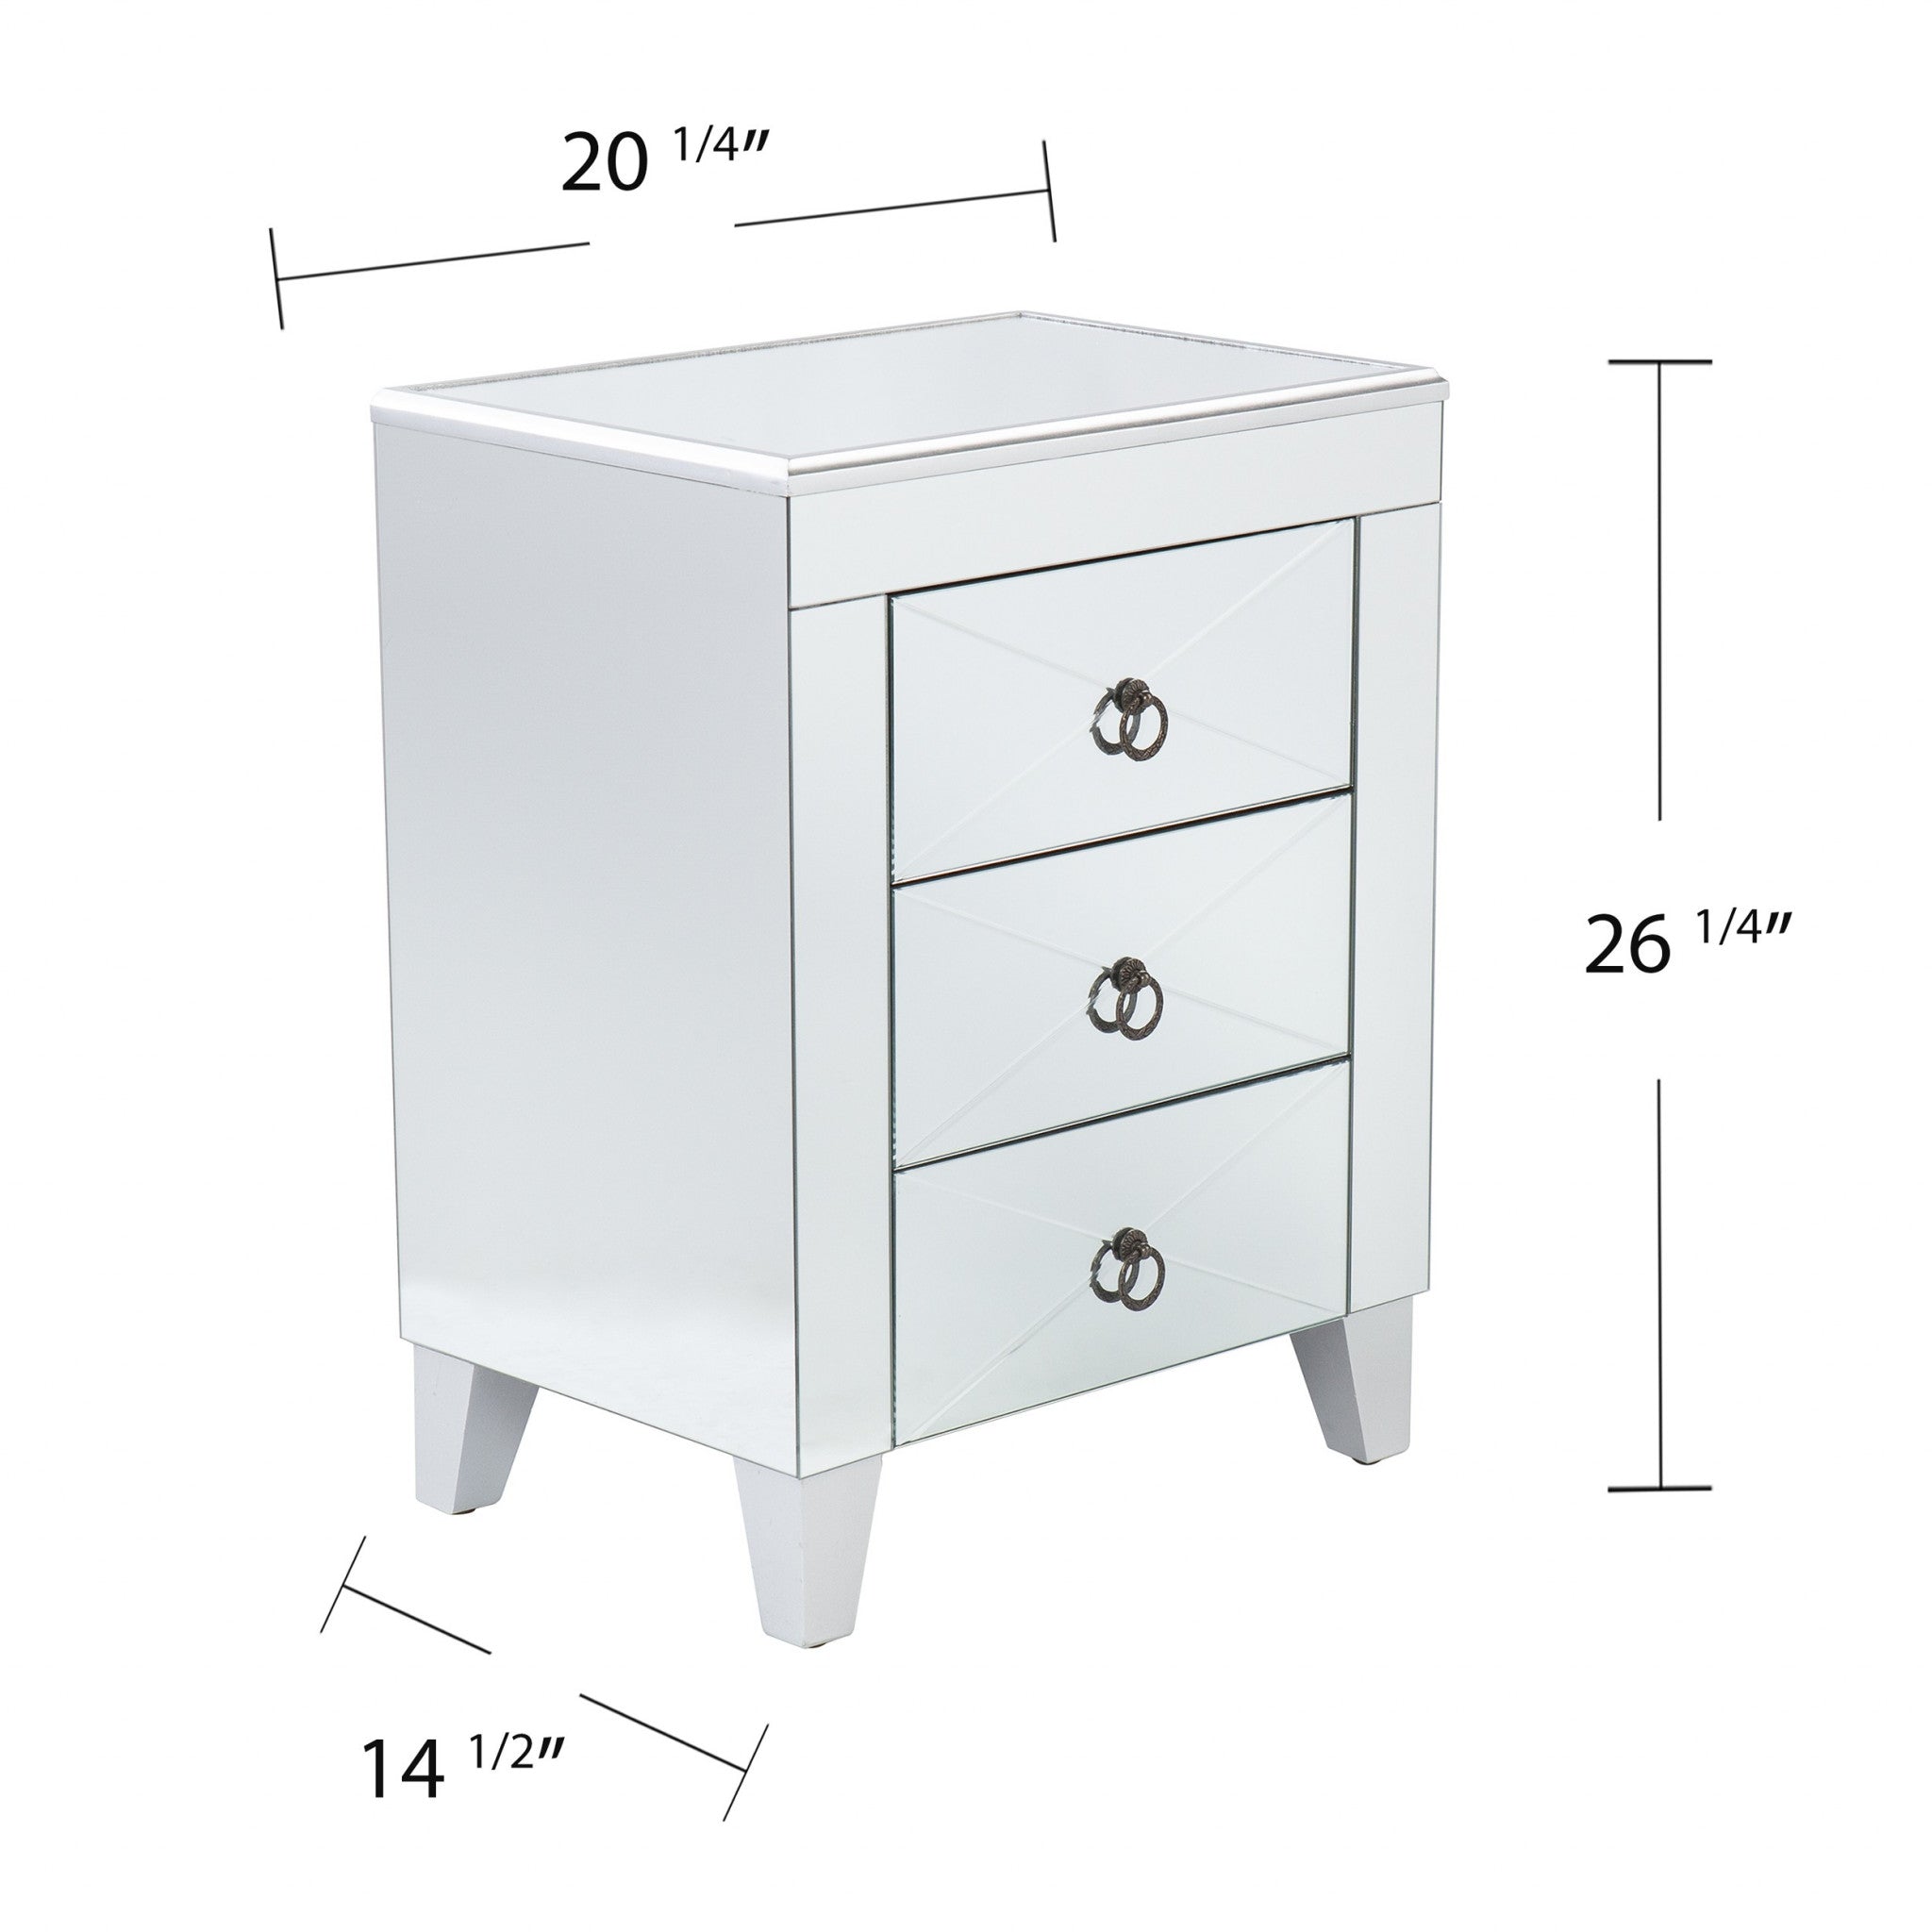 26" Silver Manufactured Wood And Iron Rectangular Mirrored End Table With Three Drawers And